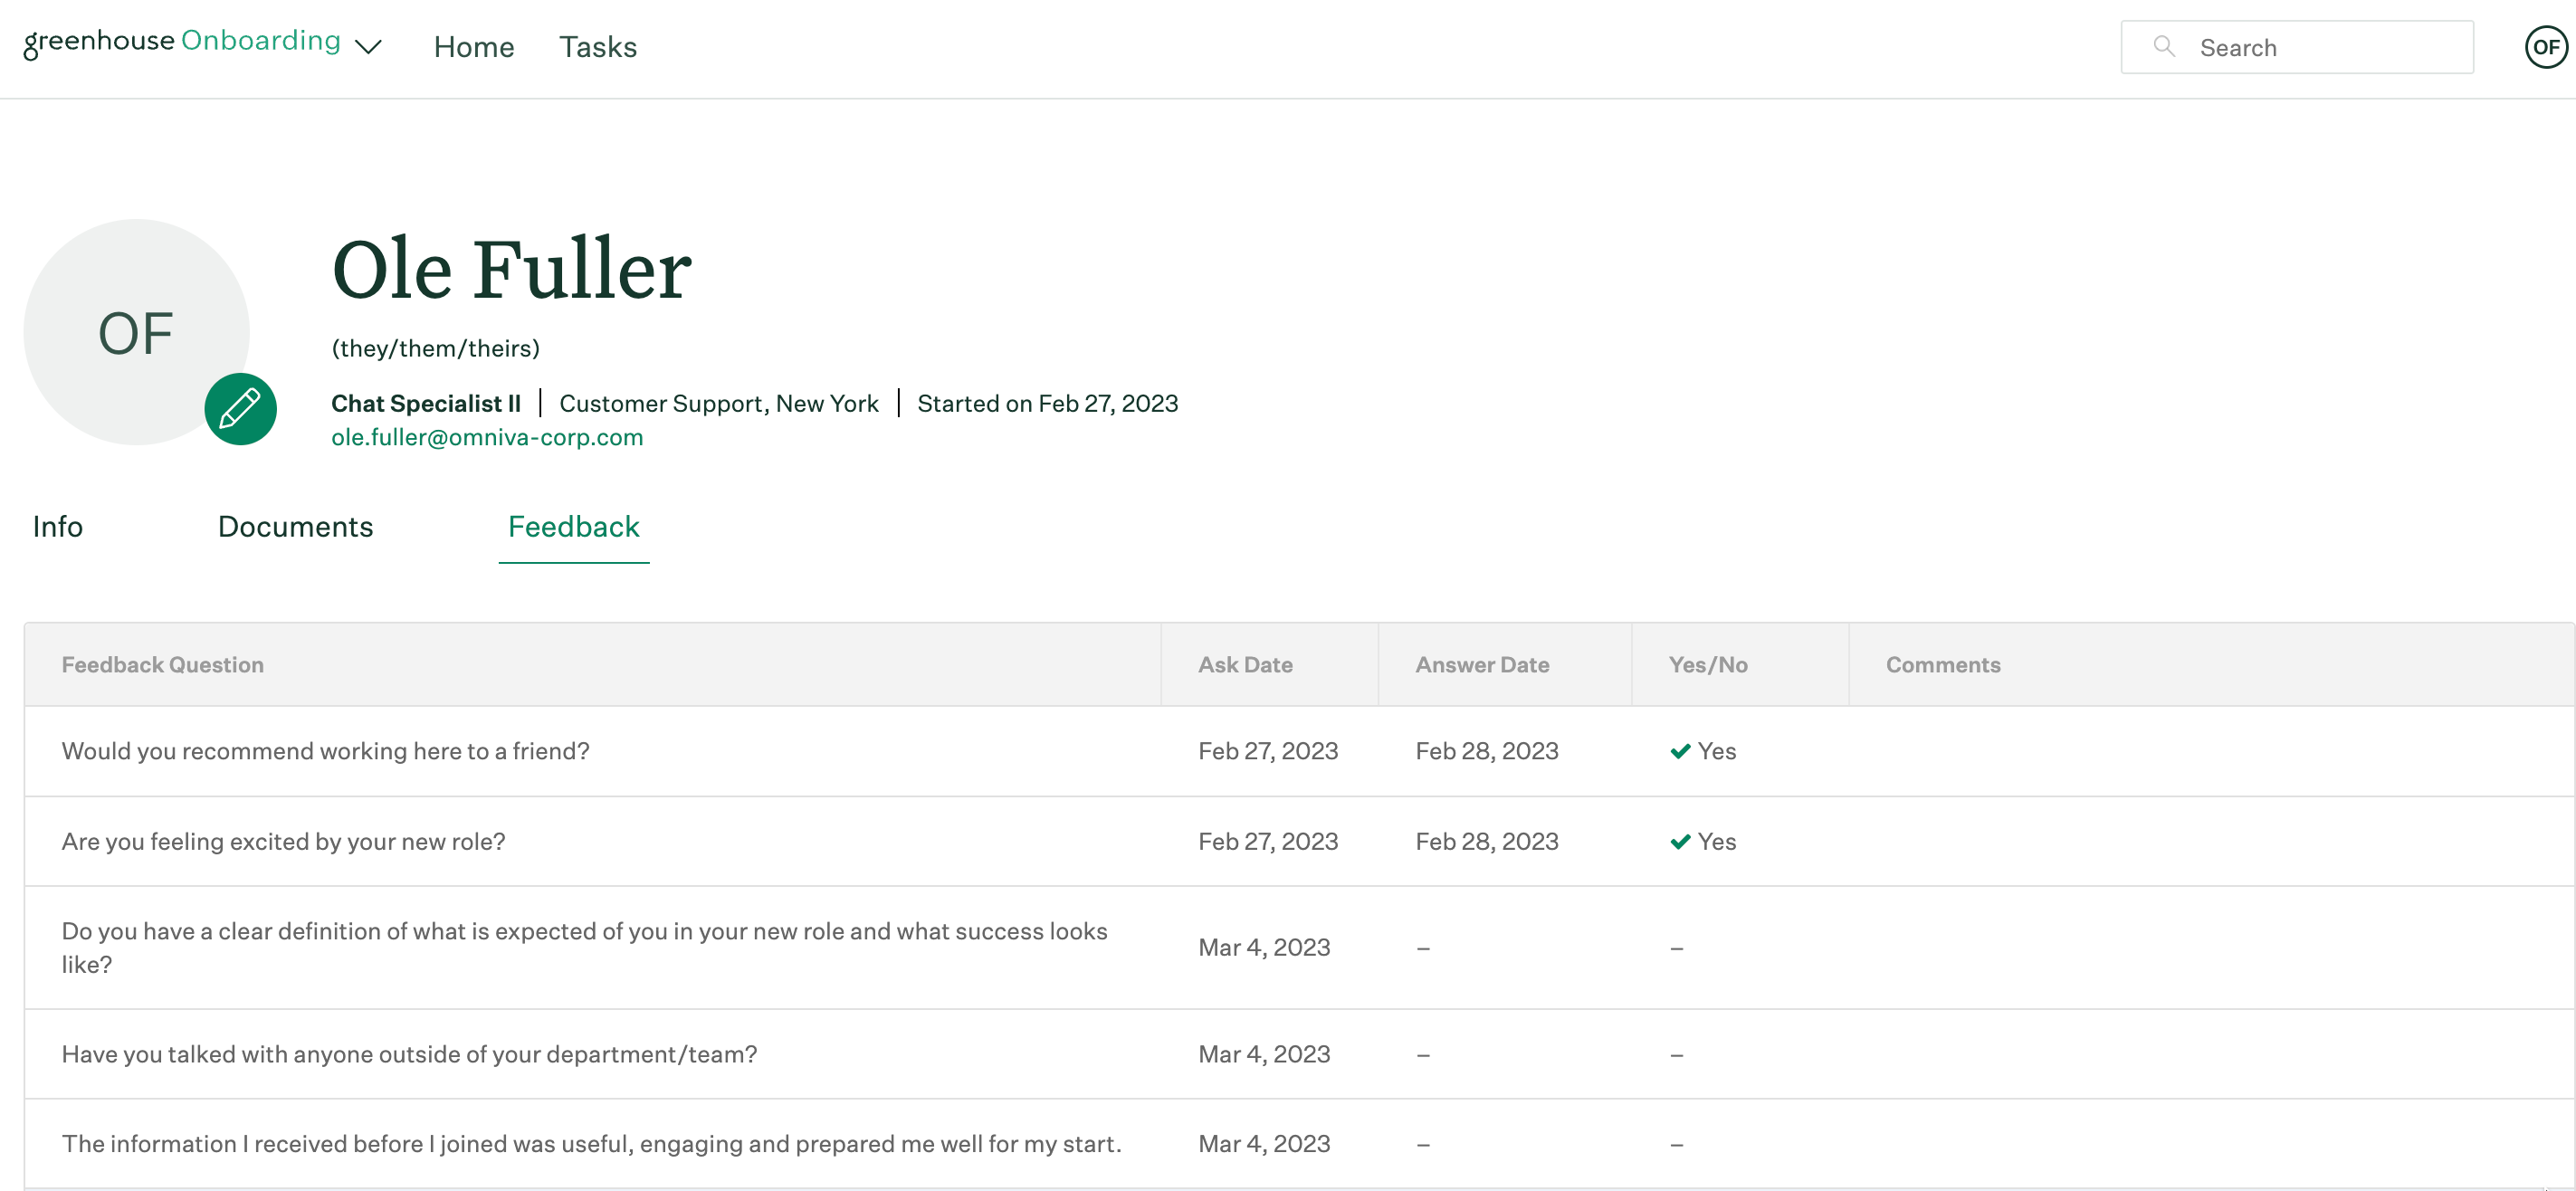 New-hire-view-of-feedback-tab-on-employee-profile-with-feedack-questions-listed.png